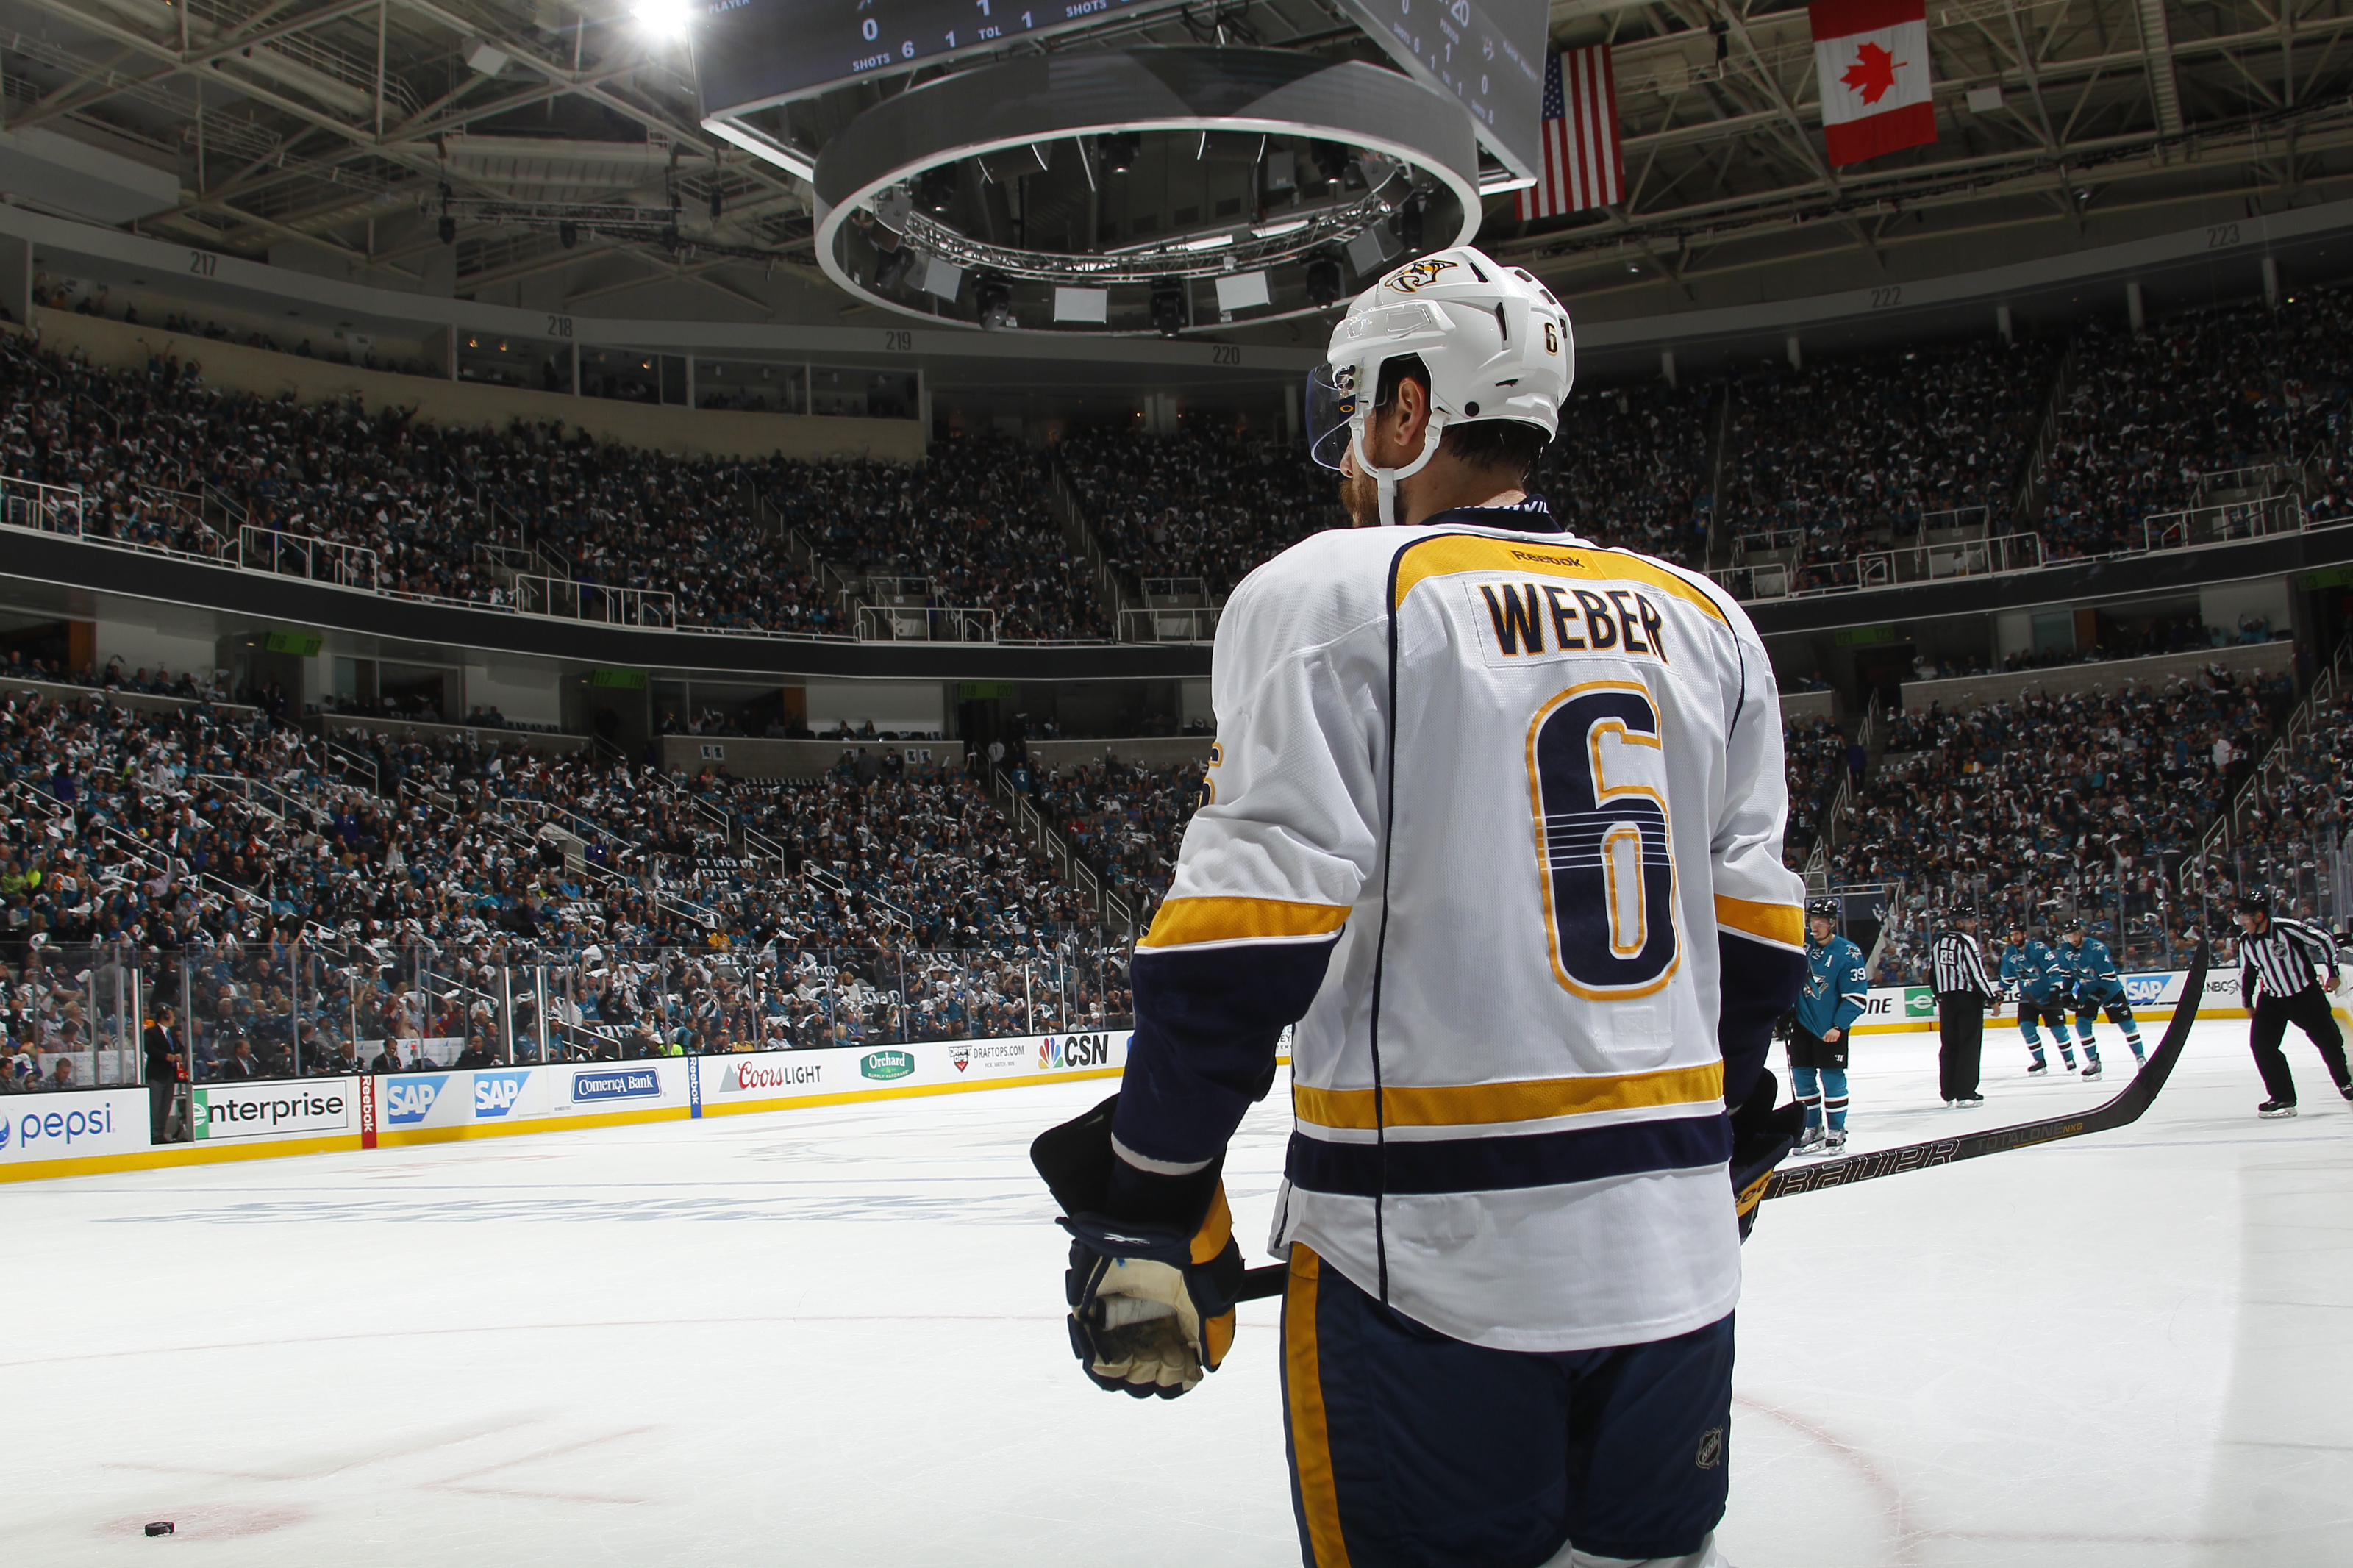 Nashville Predators: These Jerseys Have a Chance to be Retired One Day -  Page 4